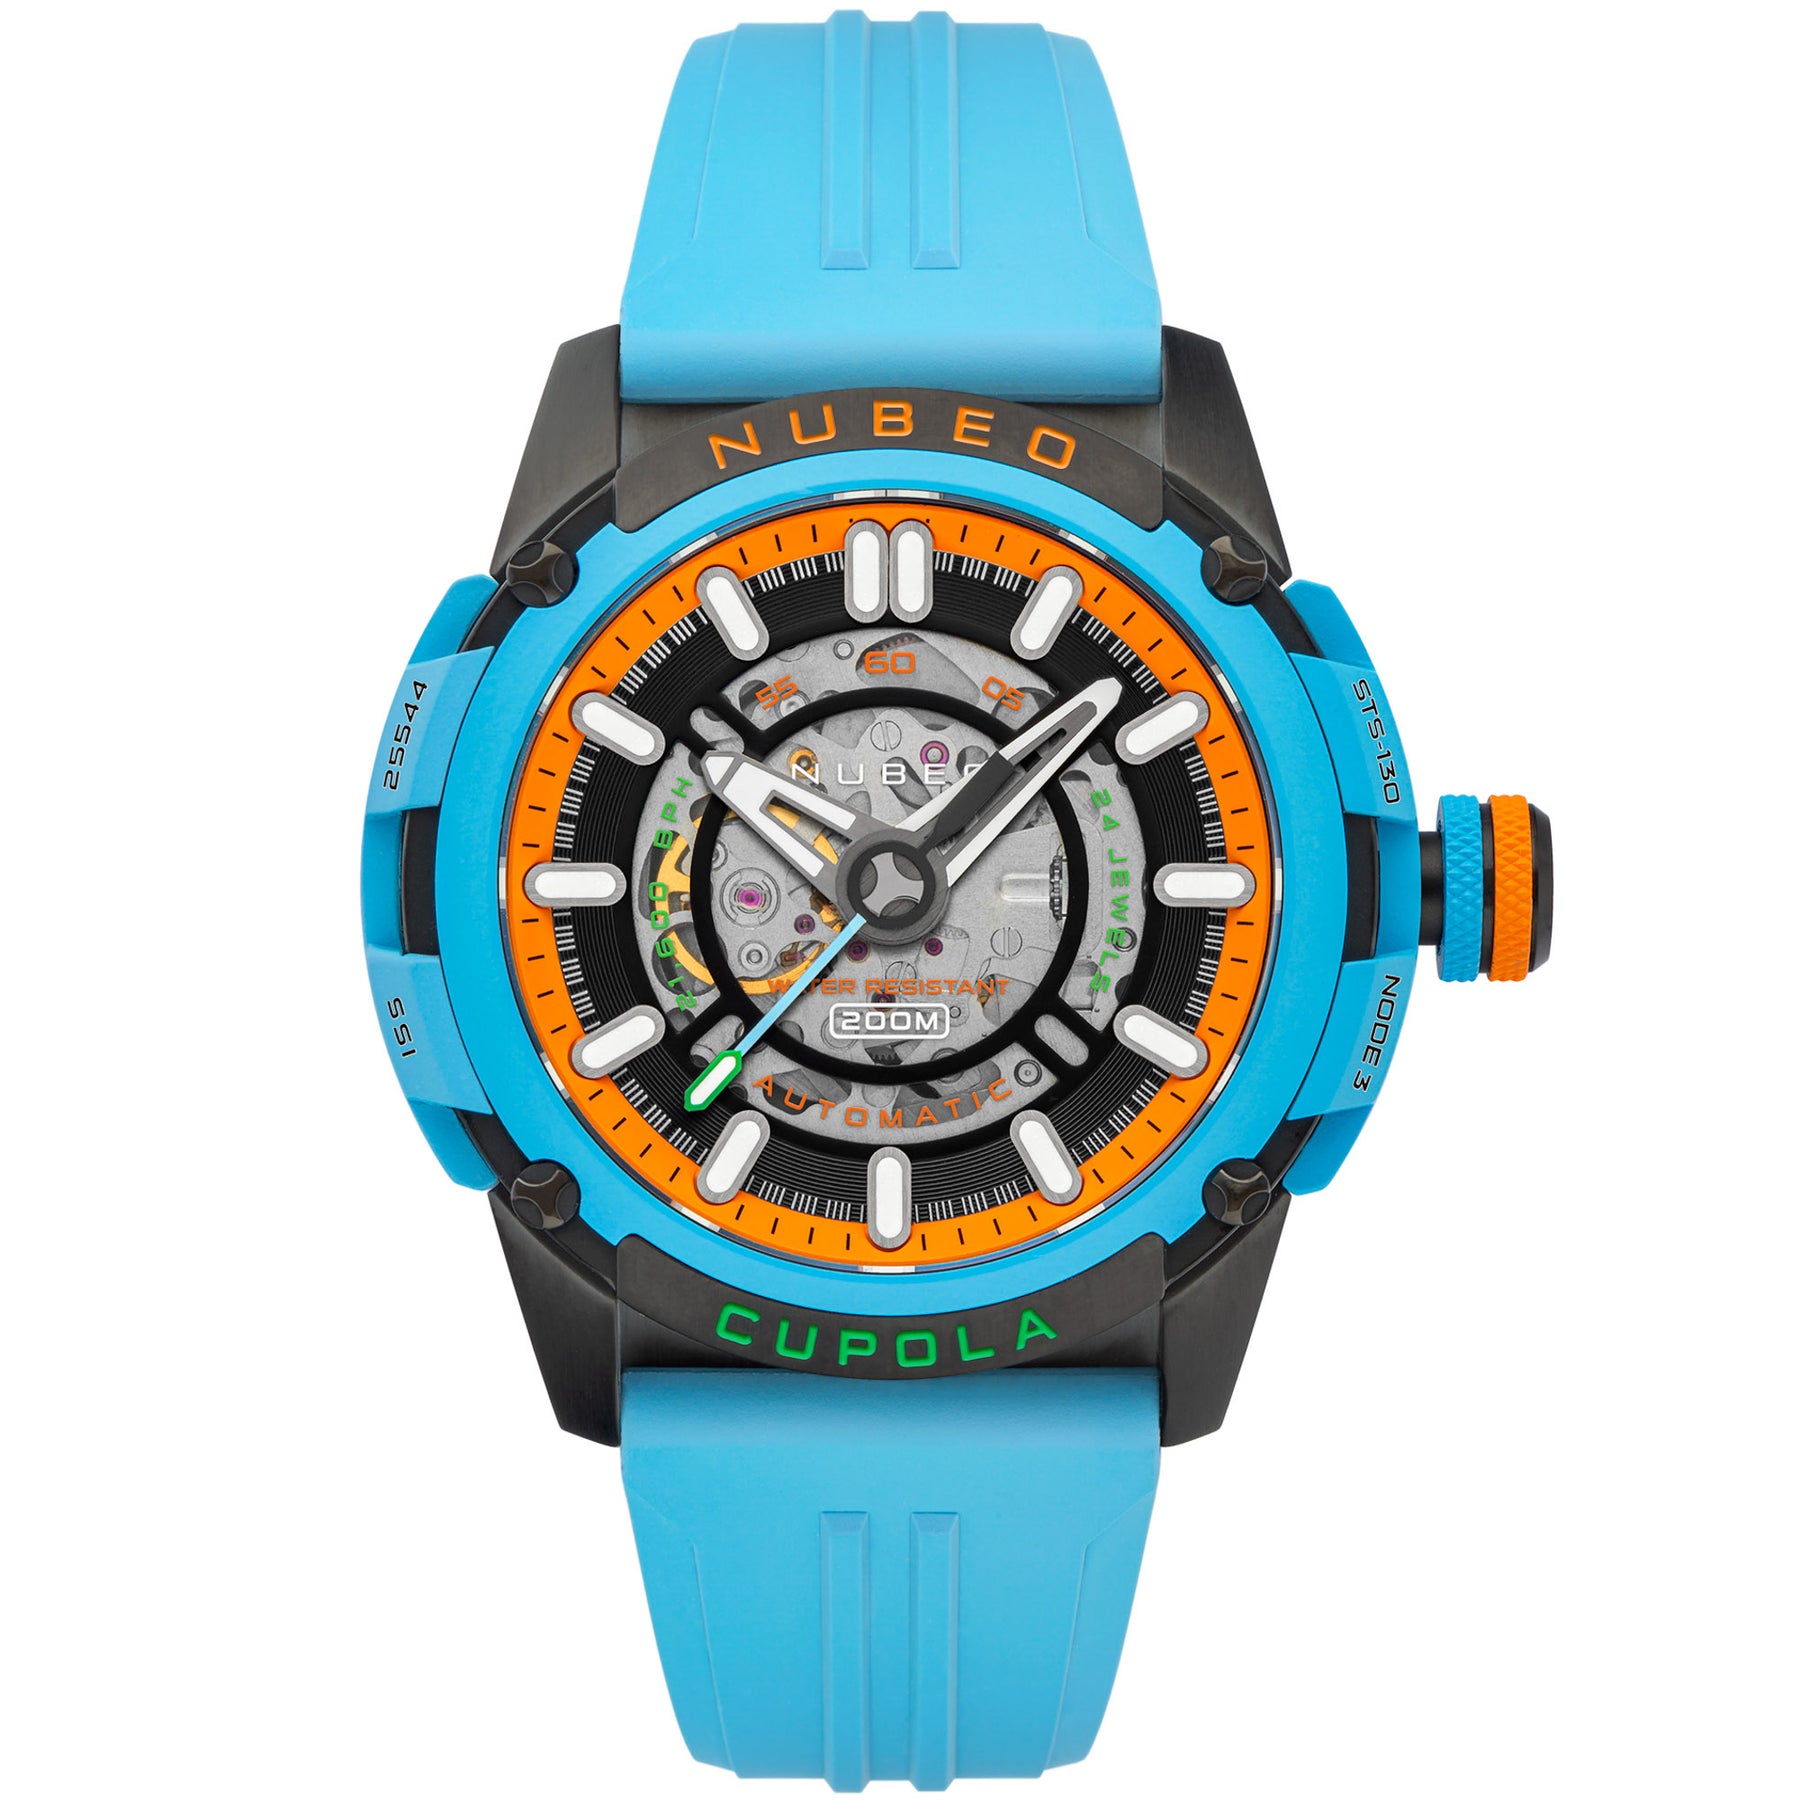 Nubeo Cupola Automatic Gulf Blue Limited Edition | Watches.com